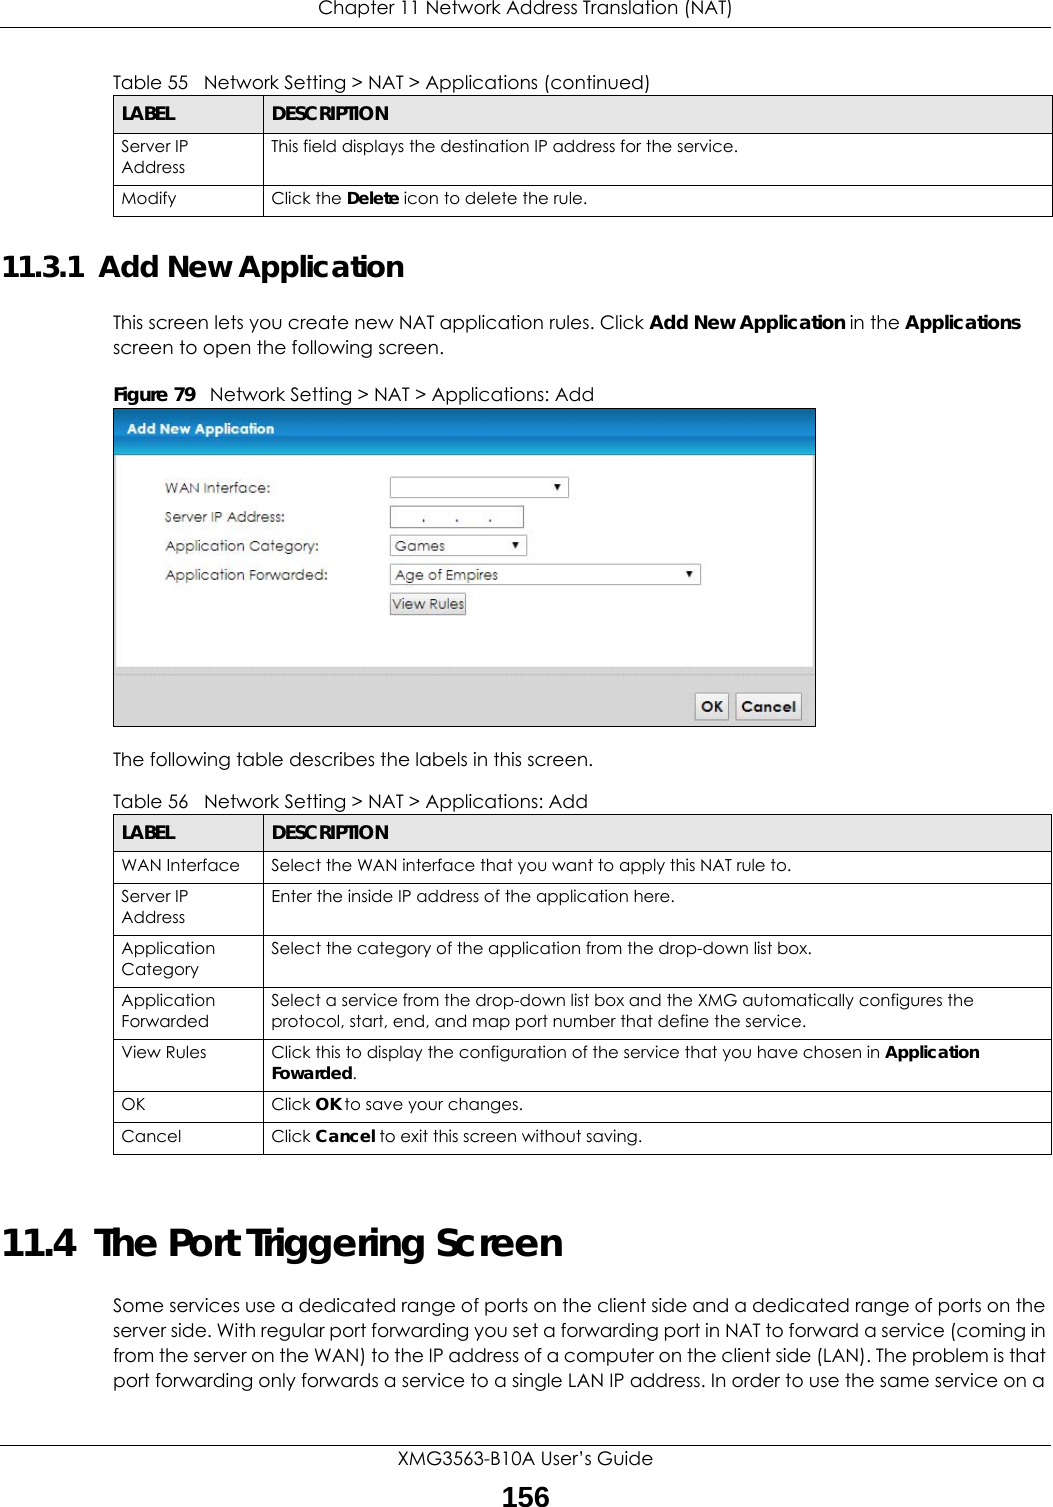 Chapter 11 Network Address Translation (NAT)XMG3563-B10A User’s Guide15611.3.1  Add New ApplicationThis screen lets you create new NAT application rules. Click Add New Application in the Applications screen to open the following screen.Figure 79   Network Setting &gt; NAT &gt; Applications: Add The following table describes the labels in this screen. 11.4  The Port Triggering ScreenSome services use a dedicated range of ports on the client side and a dedicated range of ports on the server side. With regular port forwarding you set a forwarding port in NAT to forward a service (coming in from the server on the WAN) to the IP address of a computer on the client side (LAN). The problem is that port forwarding only forwards a service to a single LAN IP address. In order to use the same service on a Server IP AddressThis field displays the destination IP address for the service.Modify Click the Delete icon to delete the rule.Table 55   Network Setting &gt; NAT &gt; Applications (continued)LABEL DESCRIPTIONTable 56   Network Setting &gt; NAT &gt; Applications: AddLABEL DESCRIPTIONWAN Interface Select the WAN interface that you want to apply this NAT rule to.Server IP AddressEnter the inside IP address of the application here.Application CategorySelect the category of the application from the drop-down list box.Application ForwardedSelect a service from the drop-down list box and the XMG automatically configures the protocol, start, end, and map port number that define the service.View Rules Click this to display the configuration of the service that you have chosen in Application Fowarded.OK Click OK to save your changes.Cancel Click Cancel to exit this screen without saving.